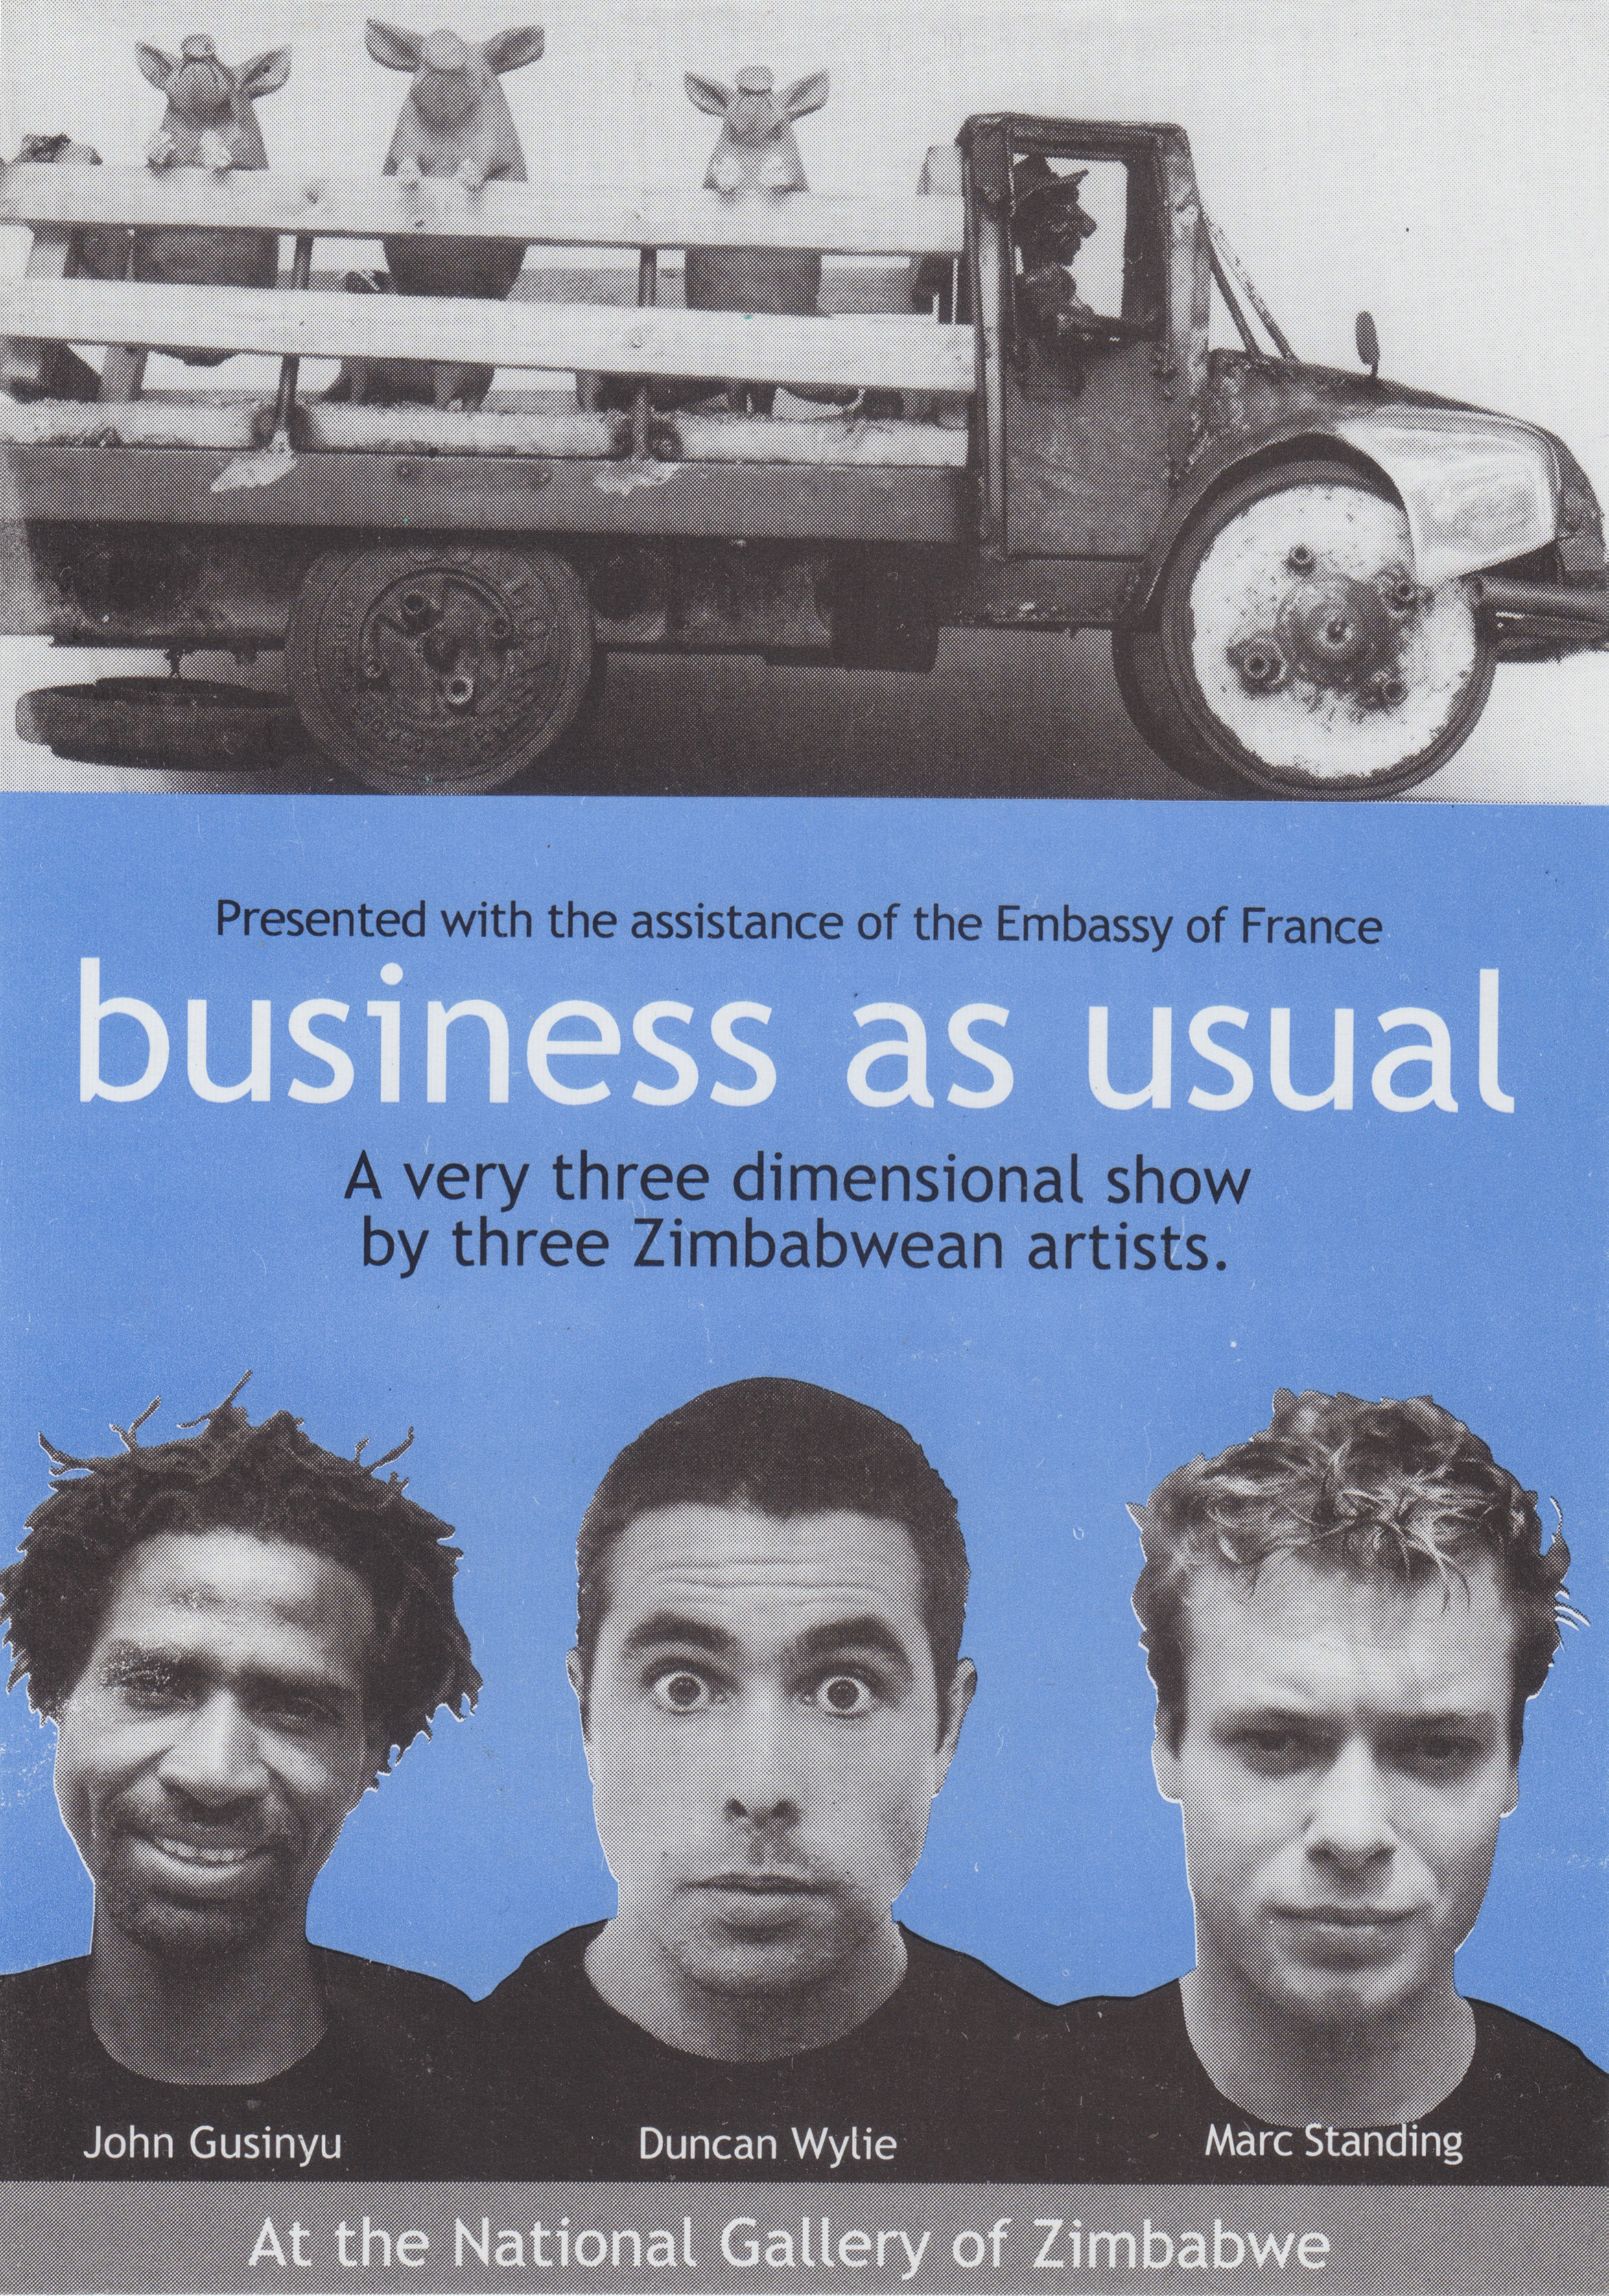  Group exhibition publication: Business as usual at the National Gallery of Zimbabwe, including artists John Gusinyu, Duncan Wylie and Marc Standing. 